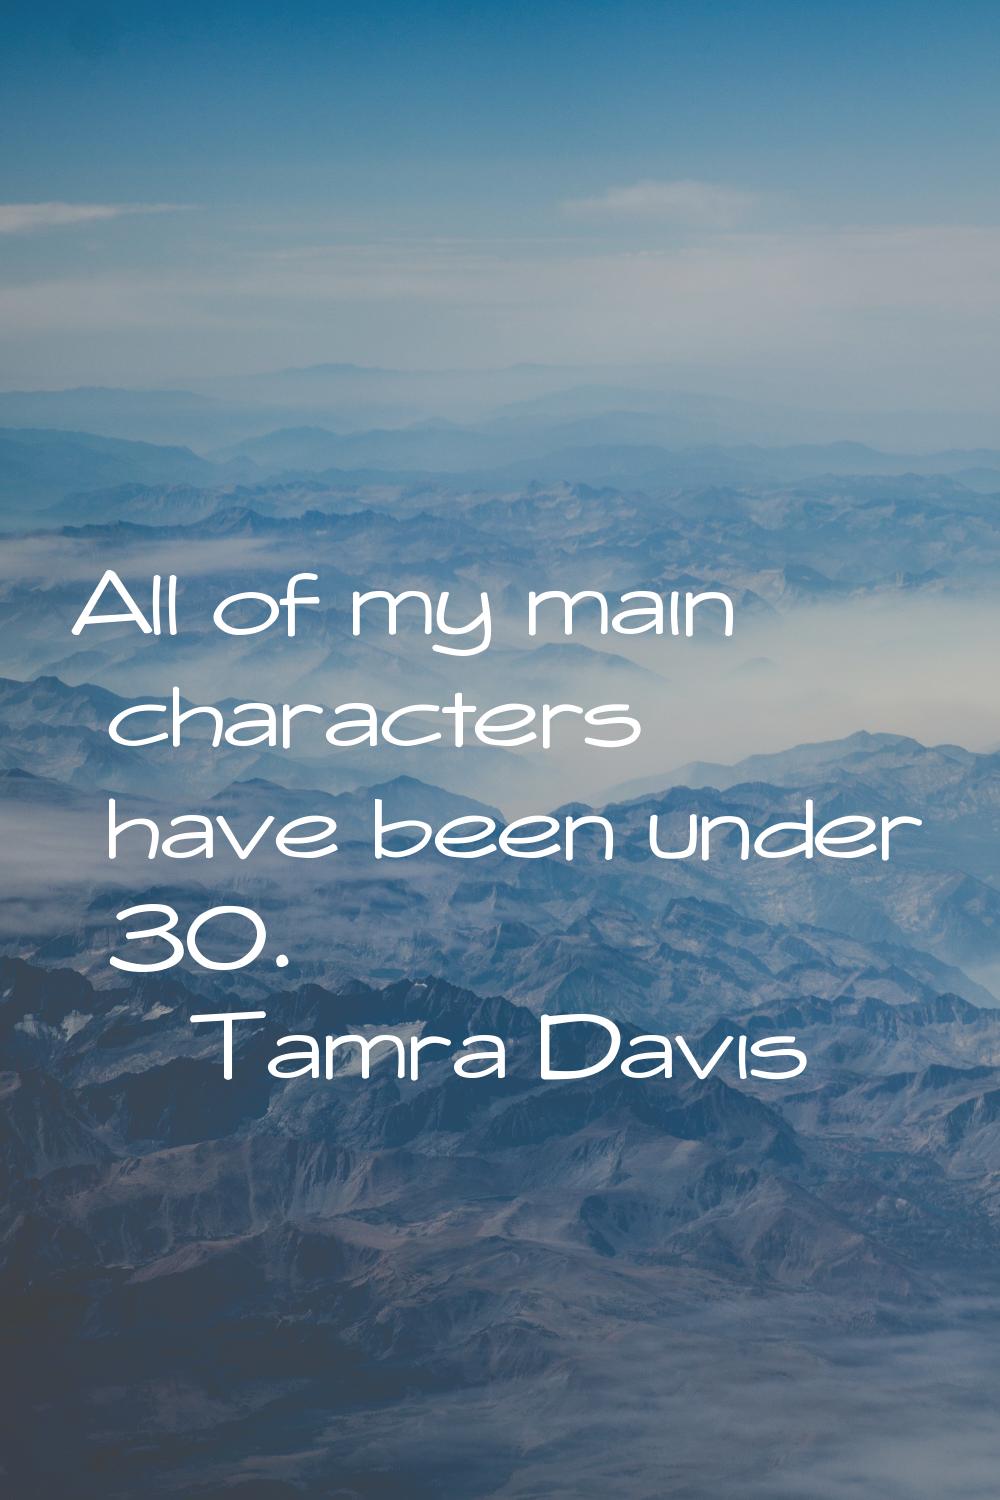 All of my main characters have been under 30.